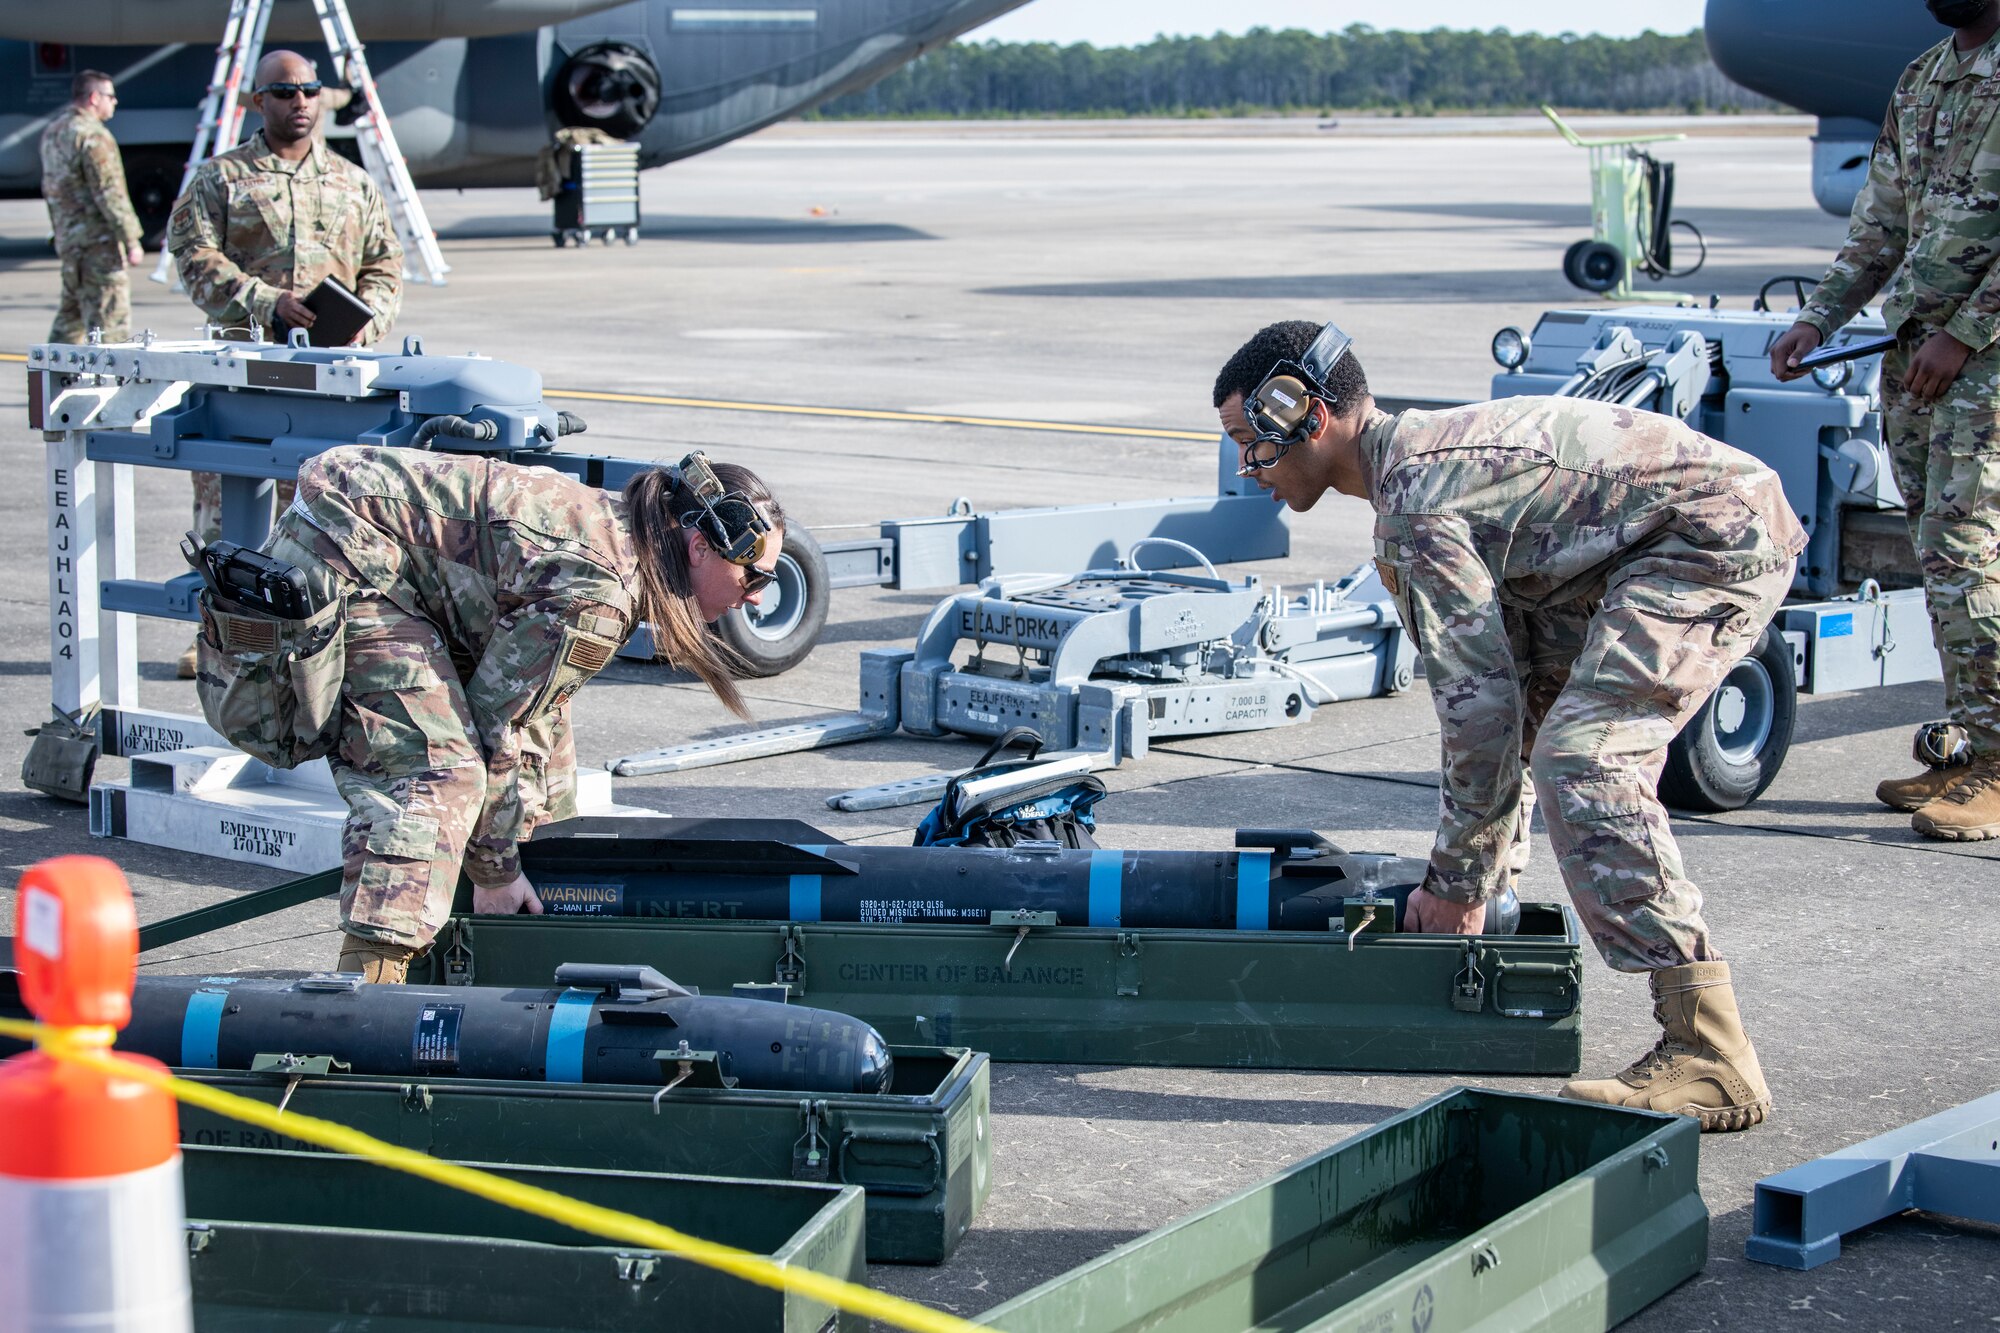 U.S. Air Force Staff Sgt. Jillian Martin, left, a 73rd Aircraft Maintenance Unit weapons load crew chief, and U.S. Air Force Senior Airman Adrian Bethea, right, a 73rd AMU load crew member, lift an AGM-114 Hellfire missile together during the 2022 Weapons Load Crew of the Year Competition, Jan. 31, 2022, at Hurlburt Field, Florida.